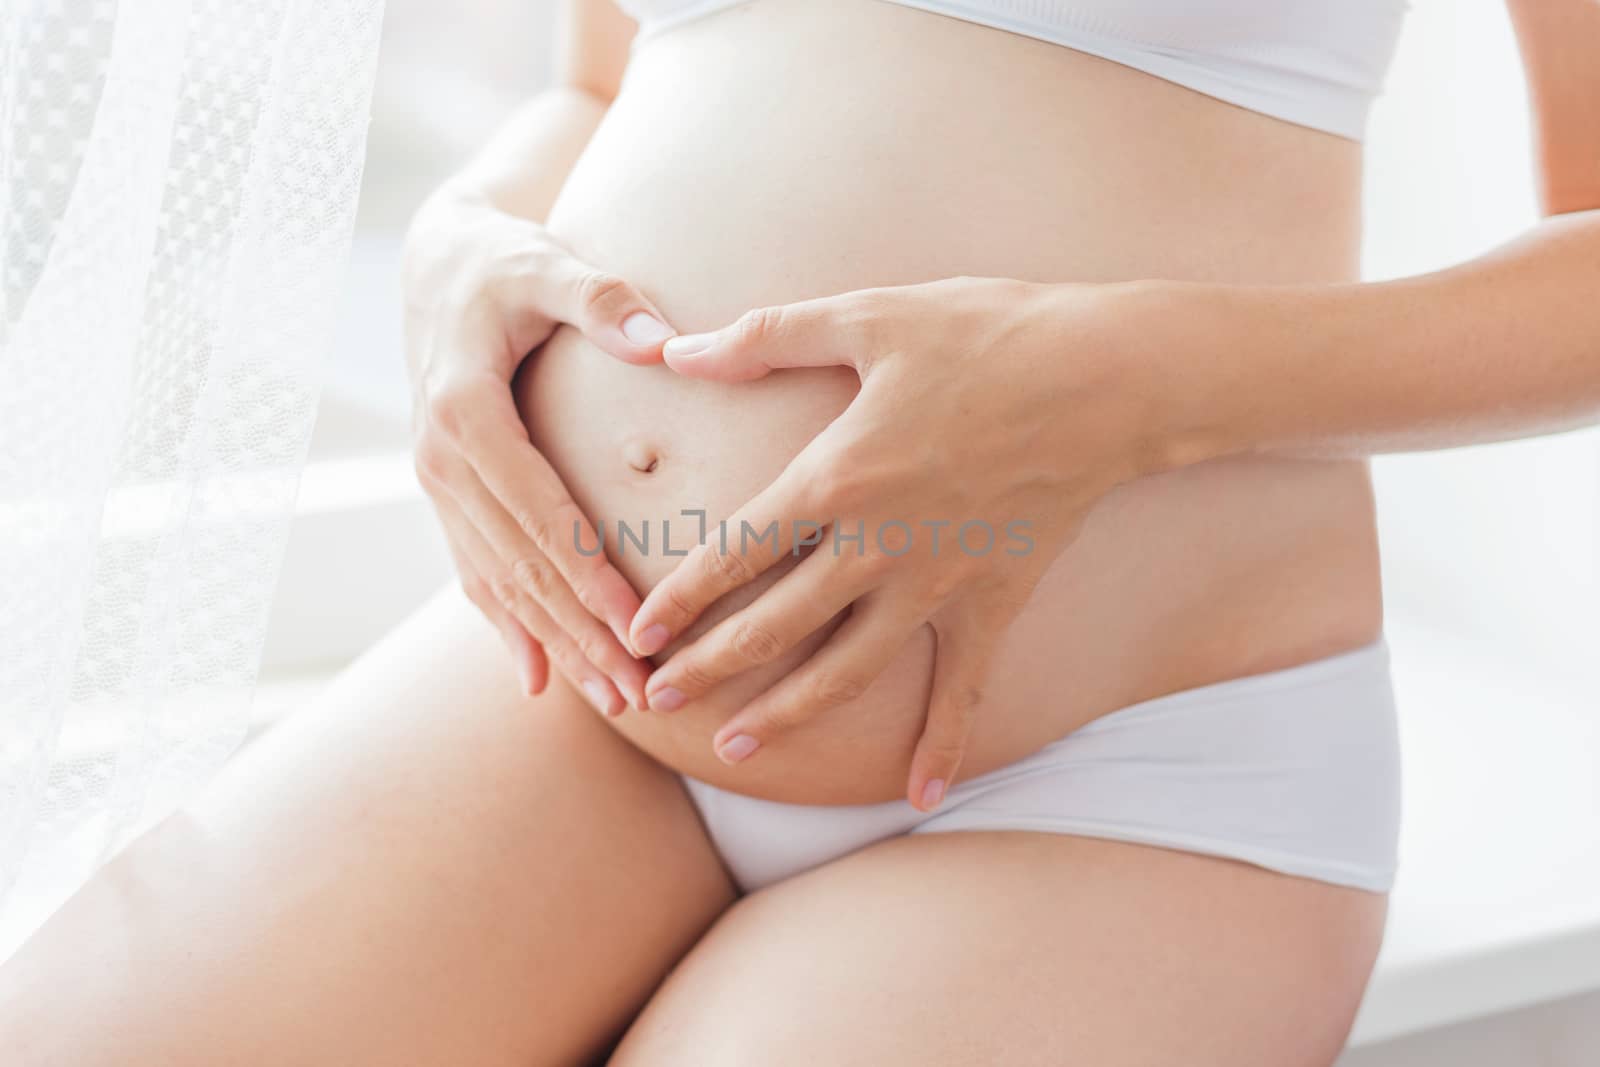 Pregnant woman in white underwear. Young woman expecting a baby. Future mother makes heart gesture - symbol of love.